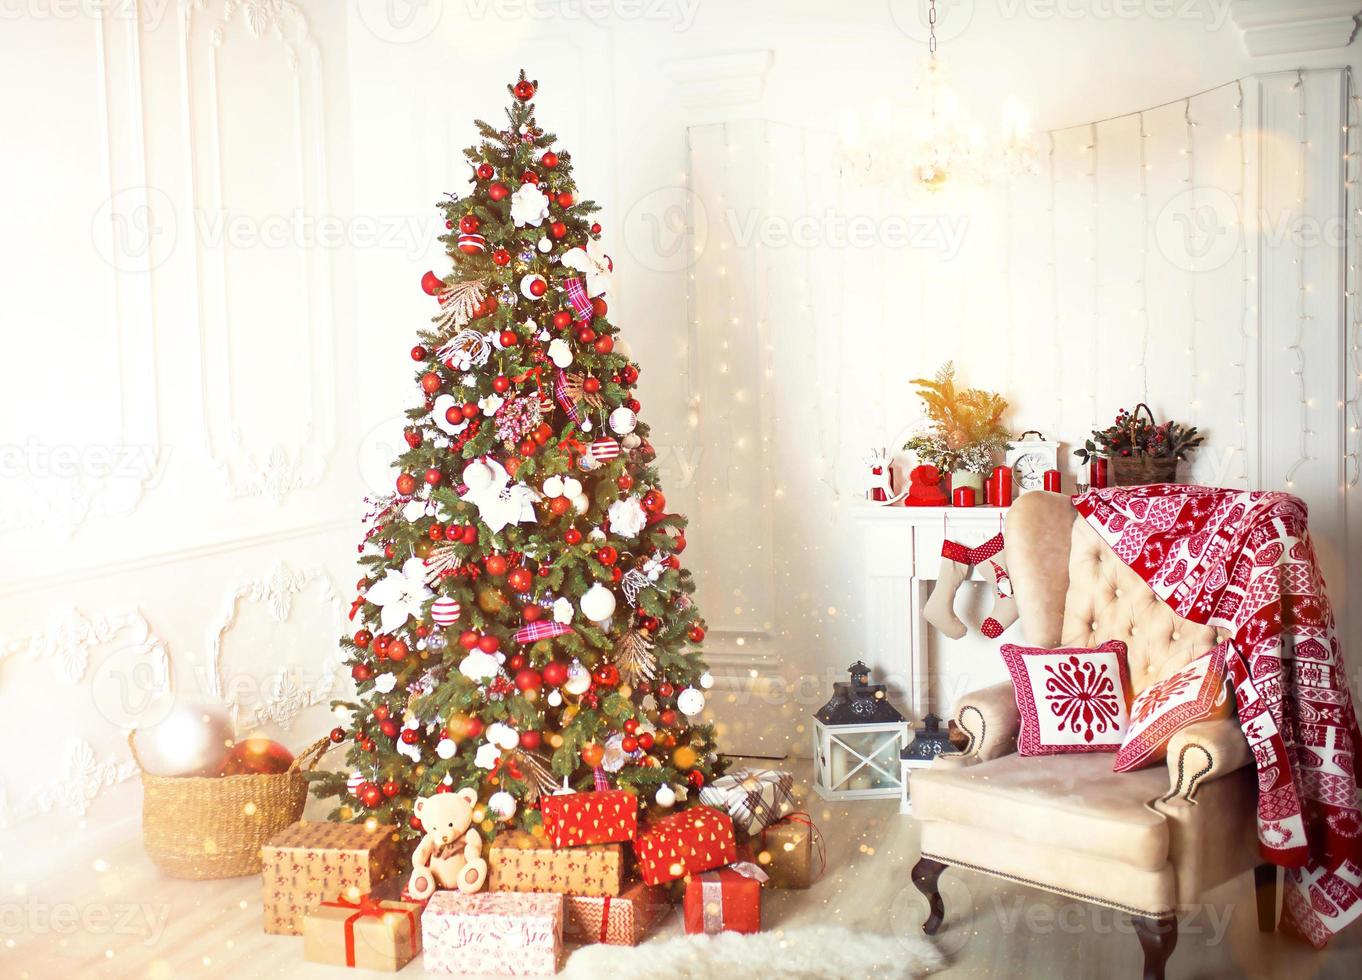 Christmas tree with red and white decor in a white living room with gifts in boxes, a chair with pillows and a blanket with winter ornaments, a fireplace, a fur rug. New year, European style. photo